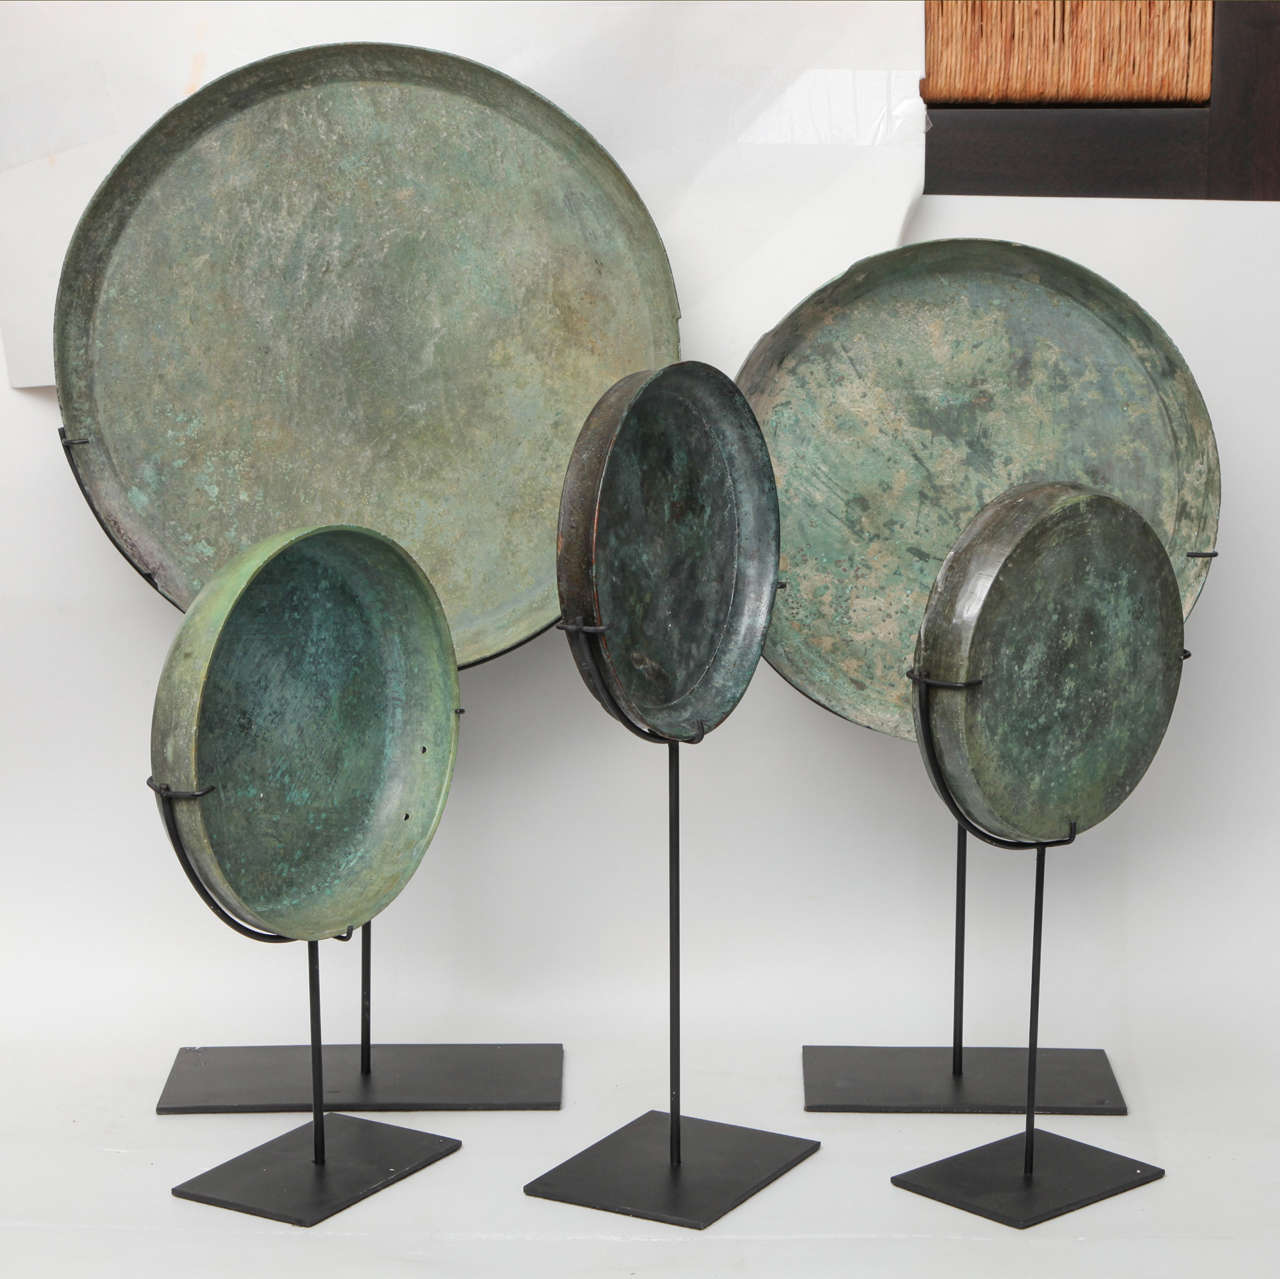 A selection of bronze trays from Thailand. On metal stands. Sizes vary. Priced and sold separately. Largest size and price shown below.